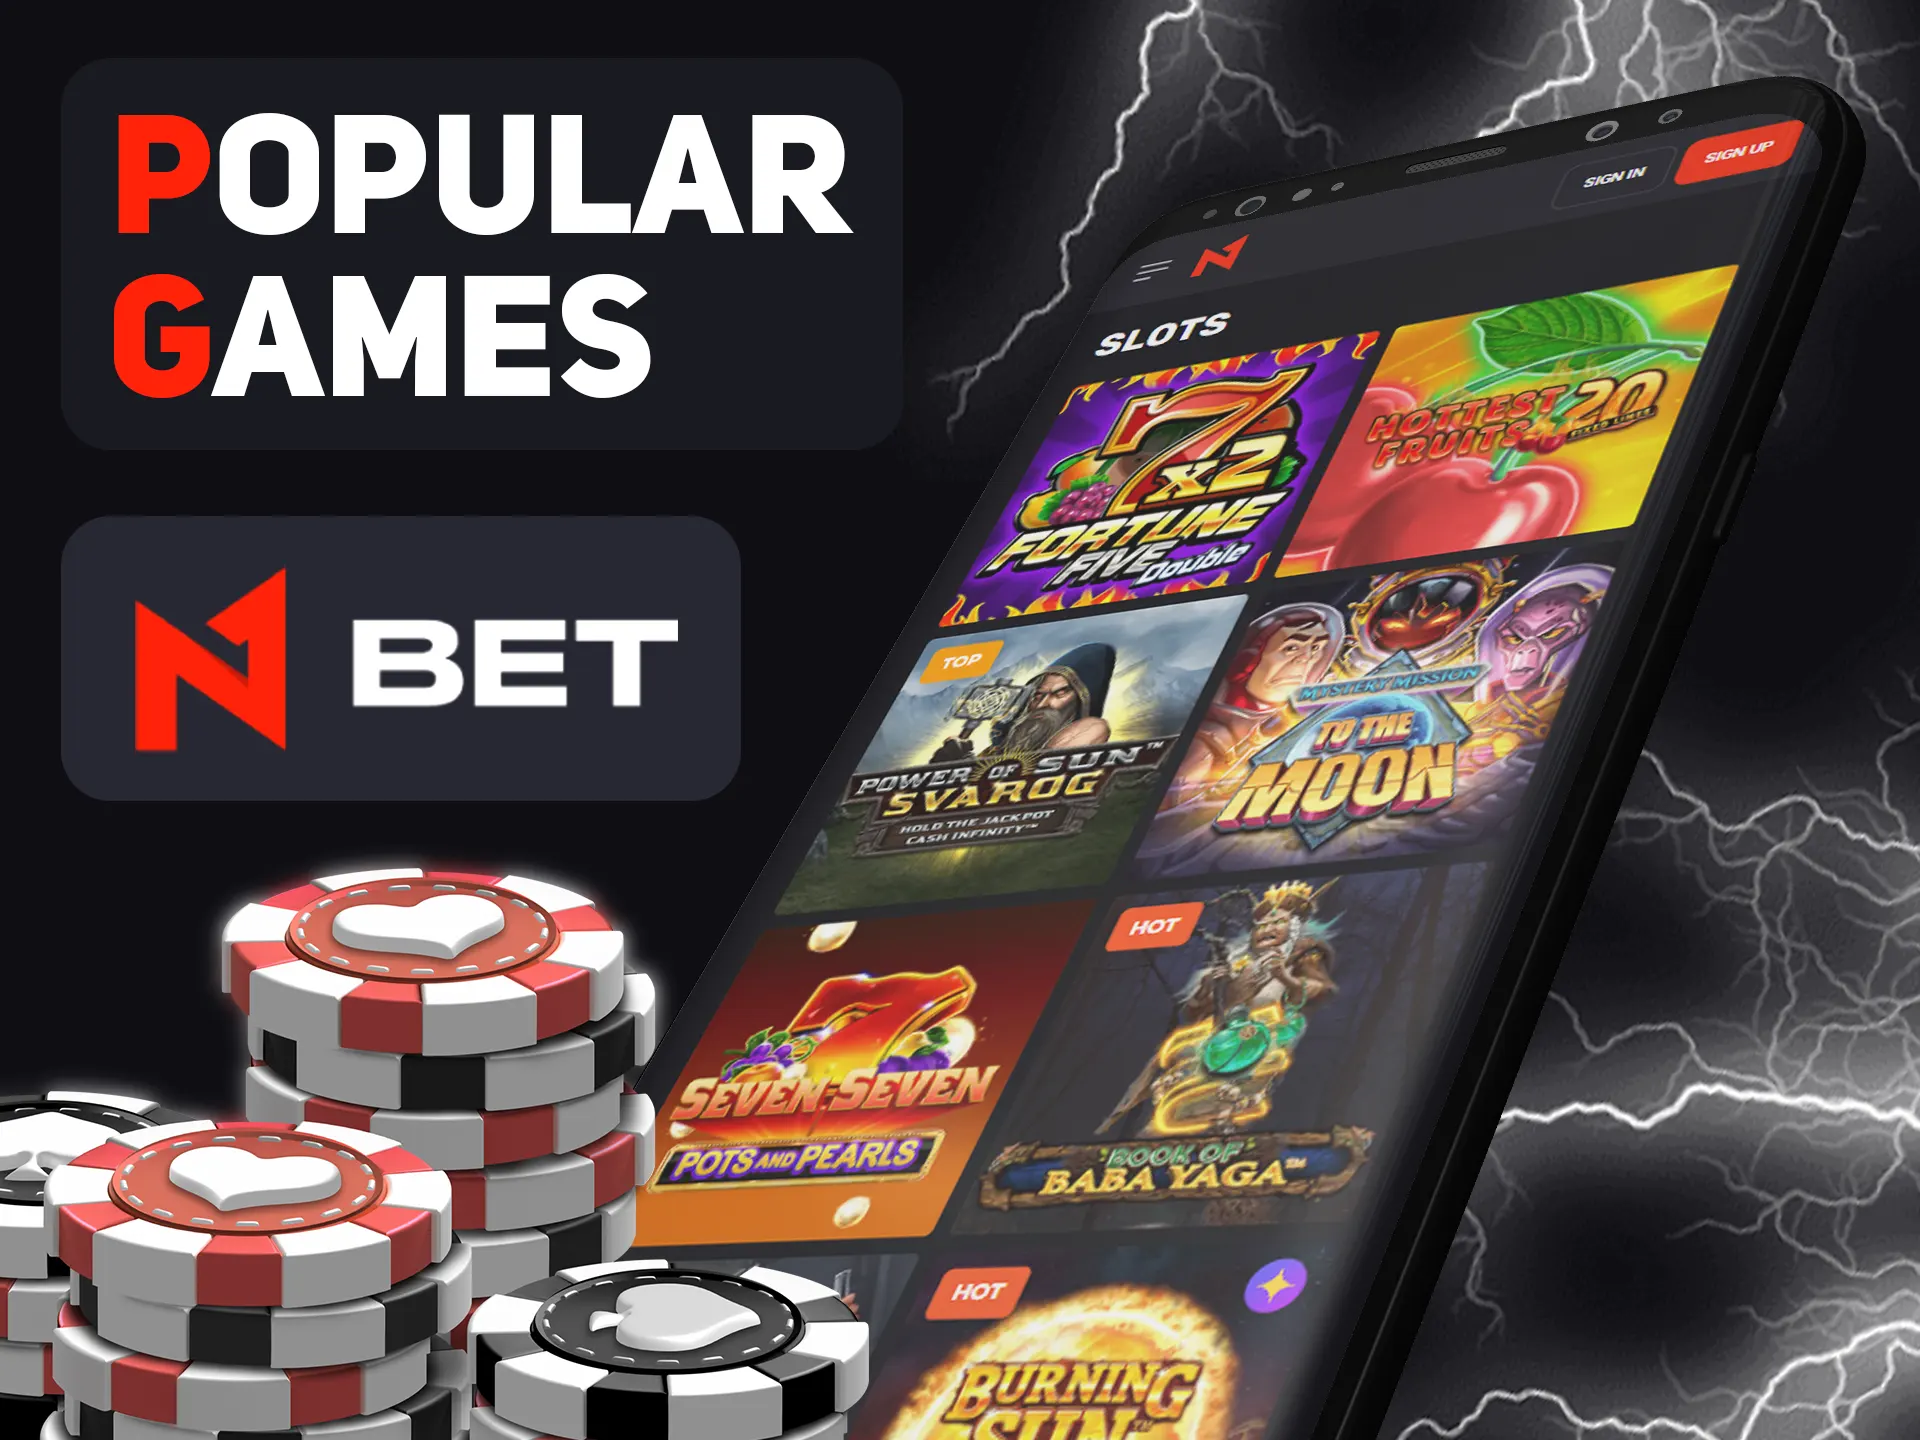 Play best casino games at N1bet casino.